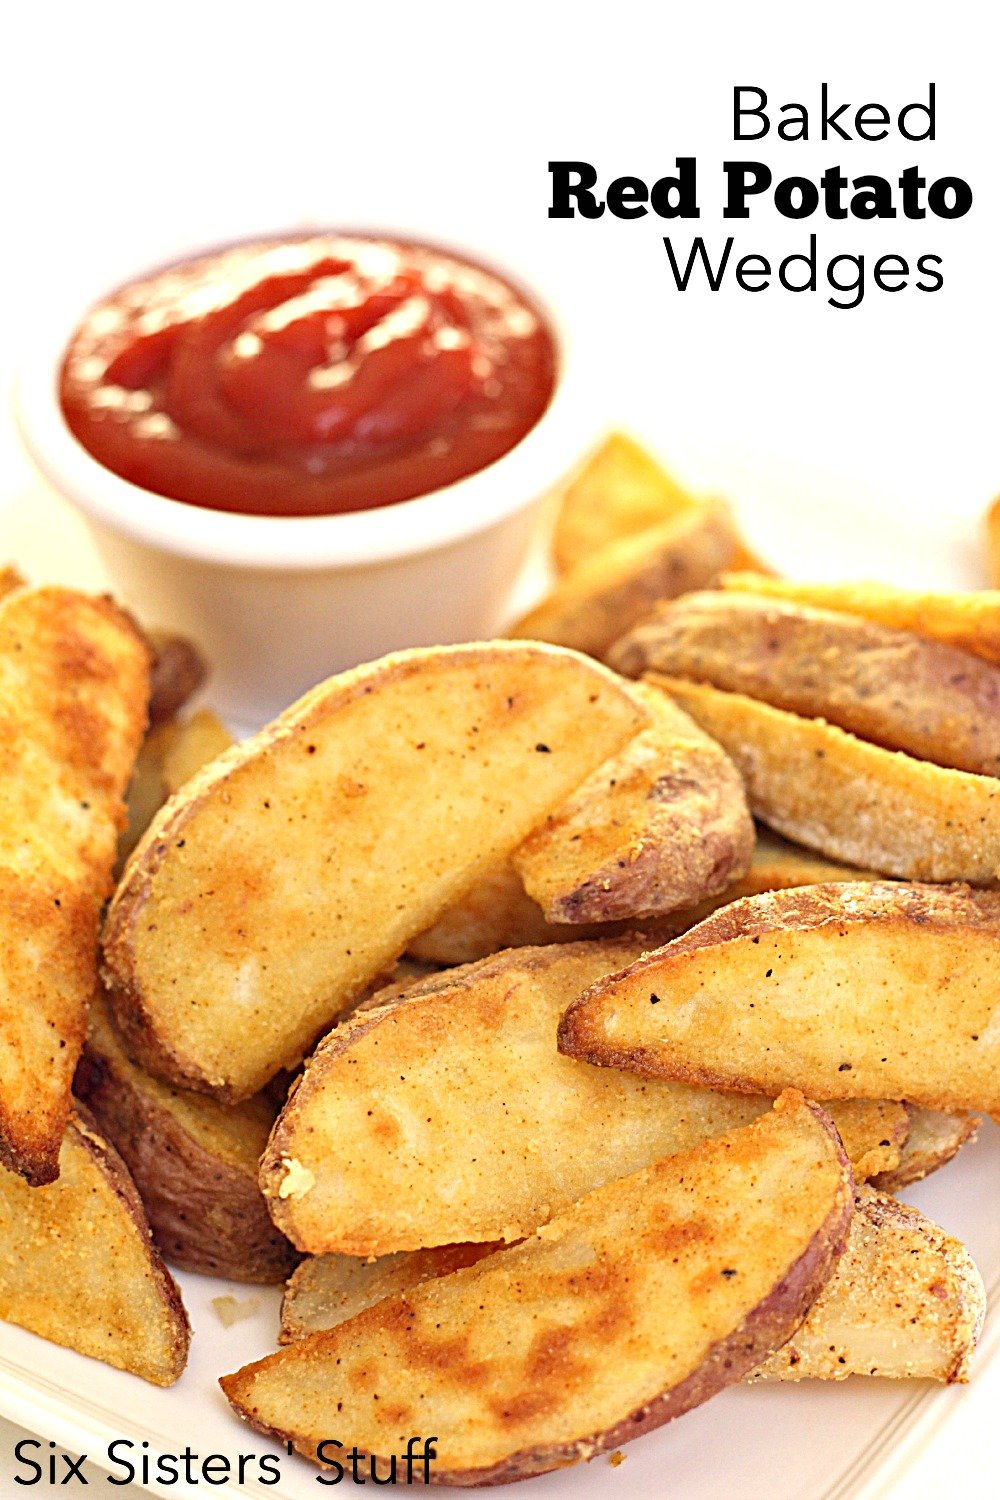 Baked Red Potato Wedges Recipe